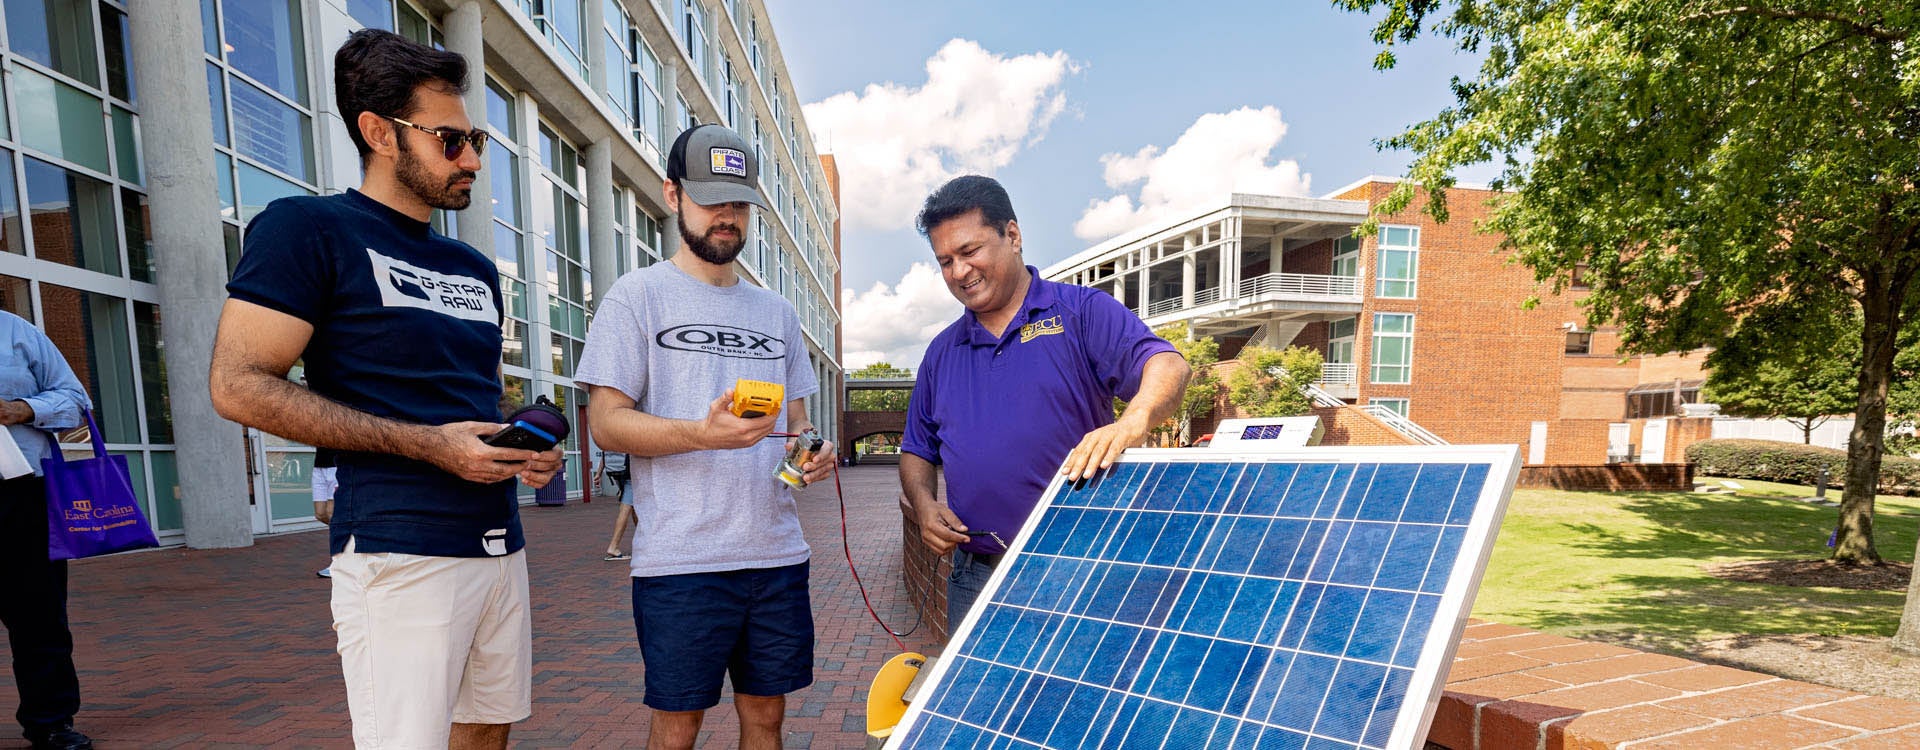 Dr. Ranjeet Agarwala, right, associate professor in the Department of Technology Systems, works with students Behzad Zeinolabedini, left, and Randy Weddle during a solar power demonstration as part of Pollution Prevention Week outside the Science and Technology Building. (Photo by Cliff Hollis)